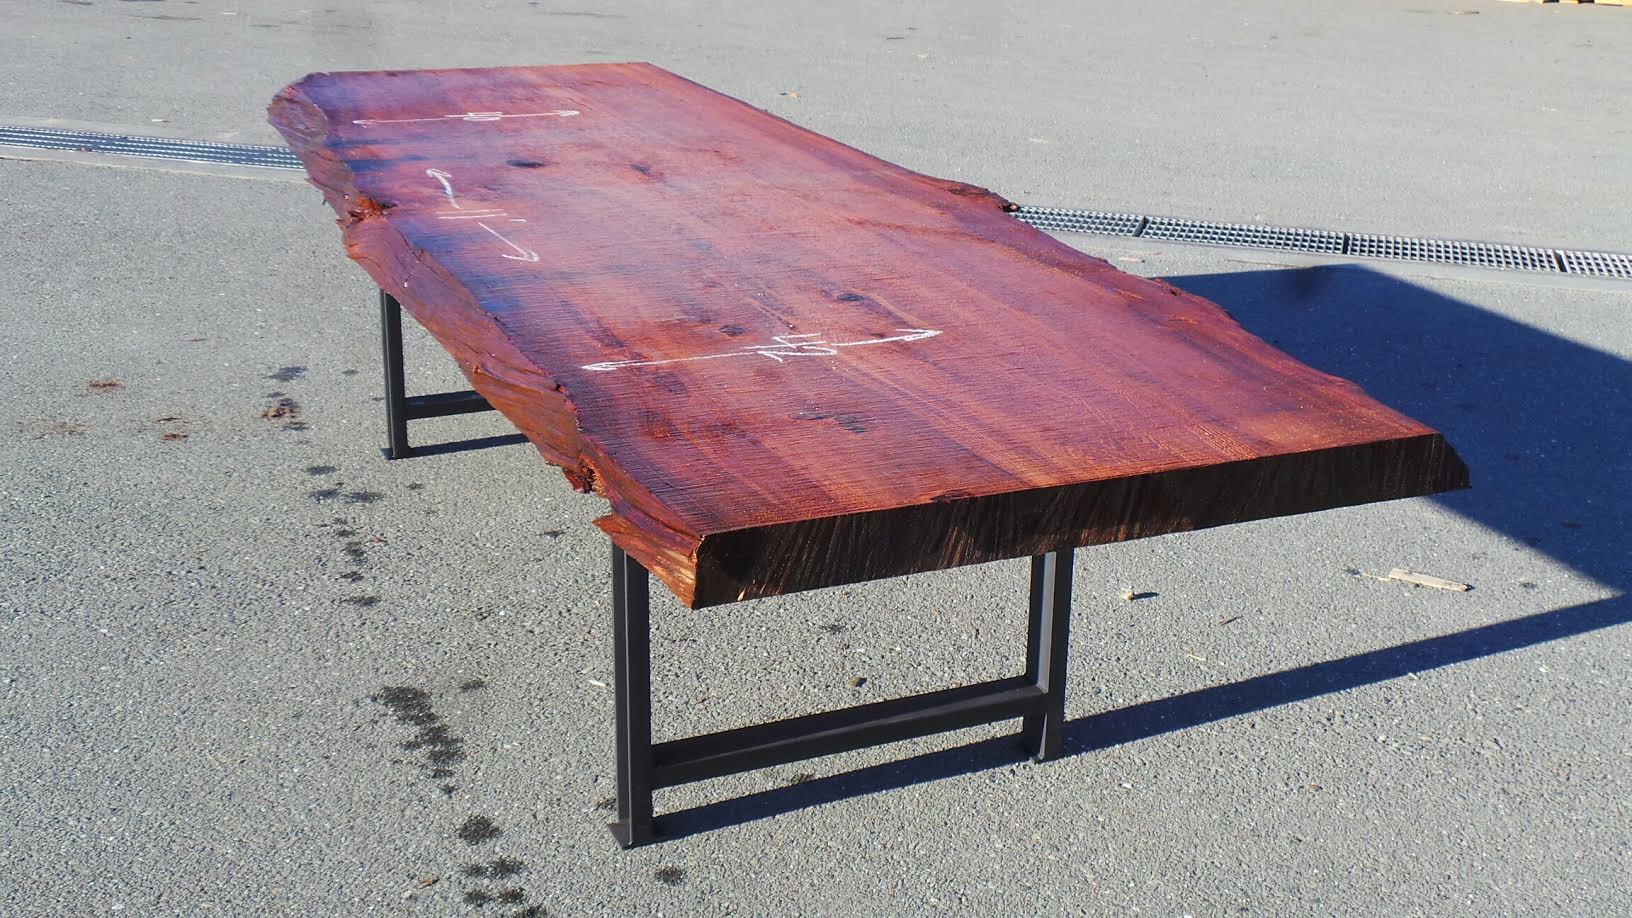 redwood dining table with industrial metal table legs (black)